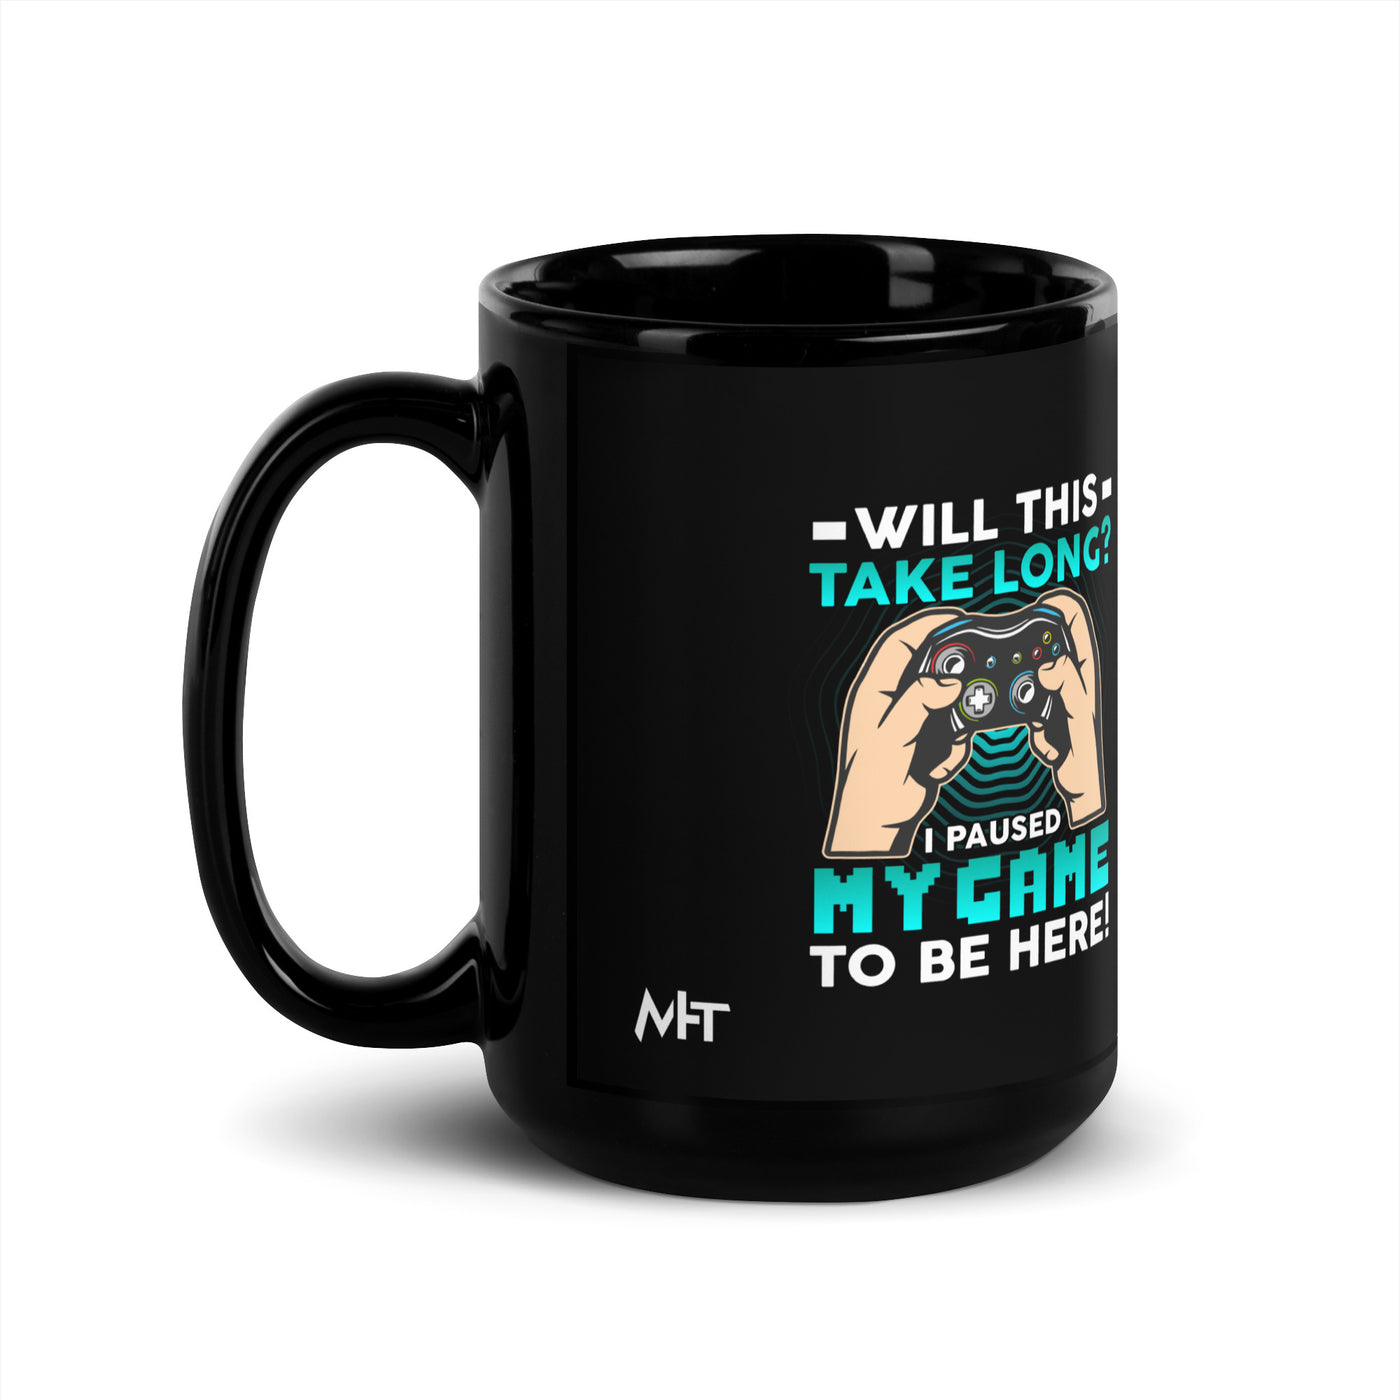 Will this take long, I paused my game to be here - Black Glossy Mug